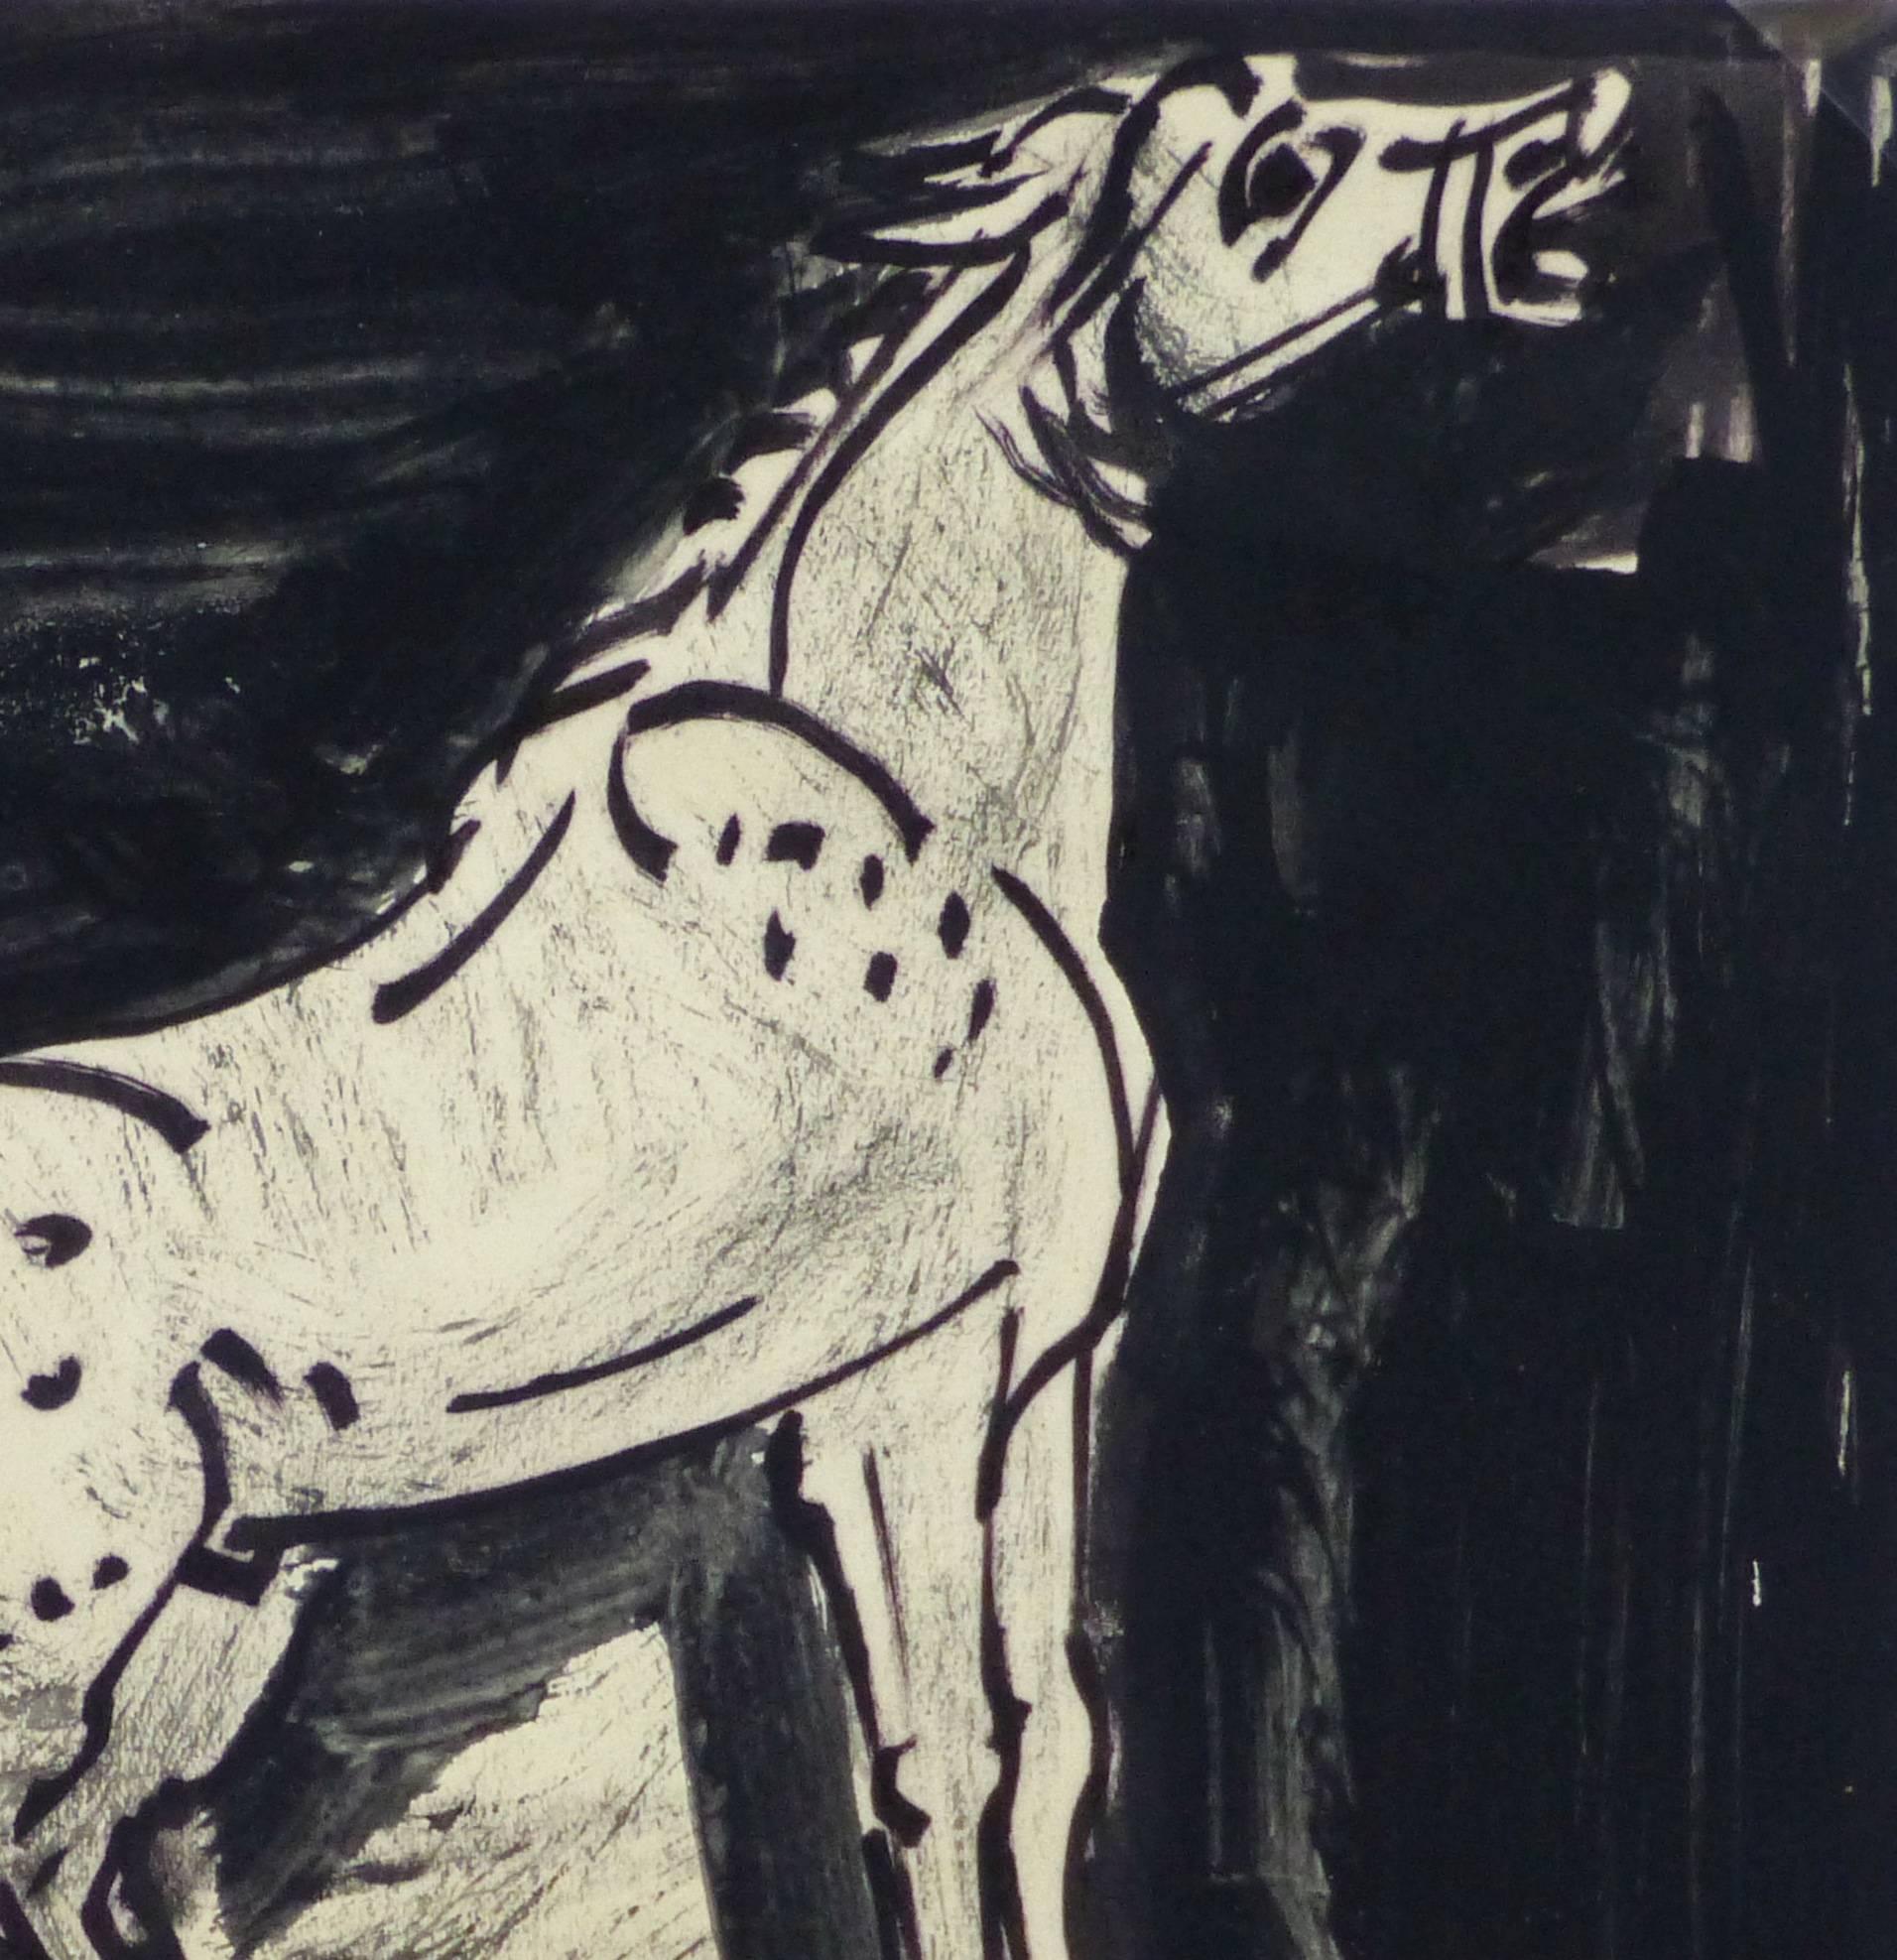 Ink Drawing - Startled in the Stall - Art by Kaupisch Von Reppert Irmgard